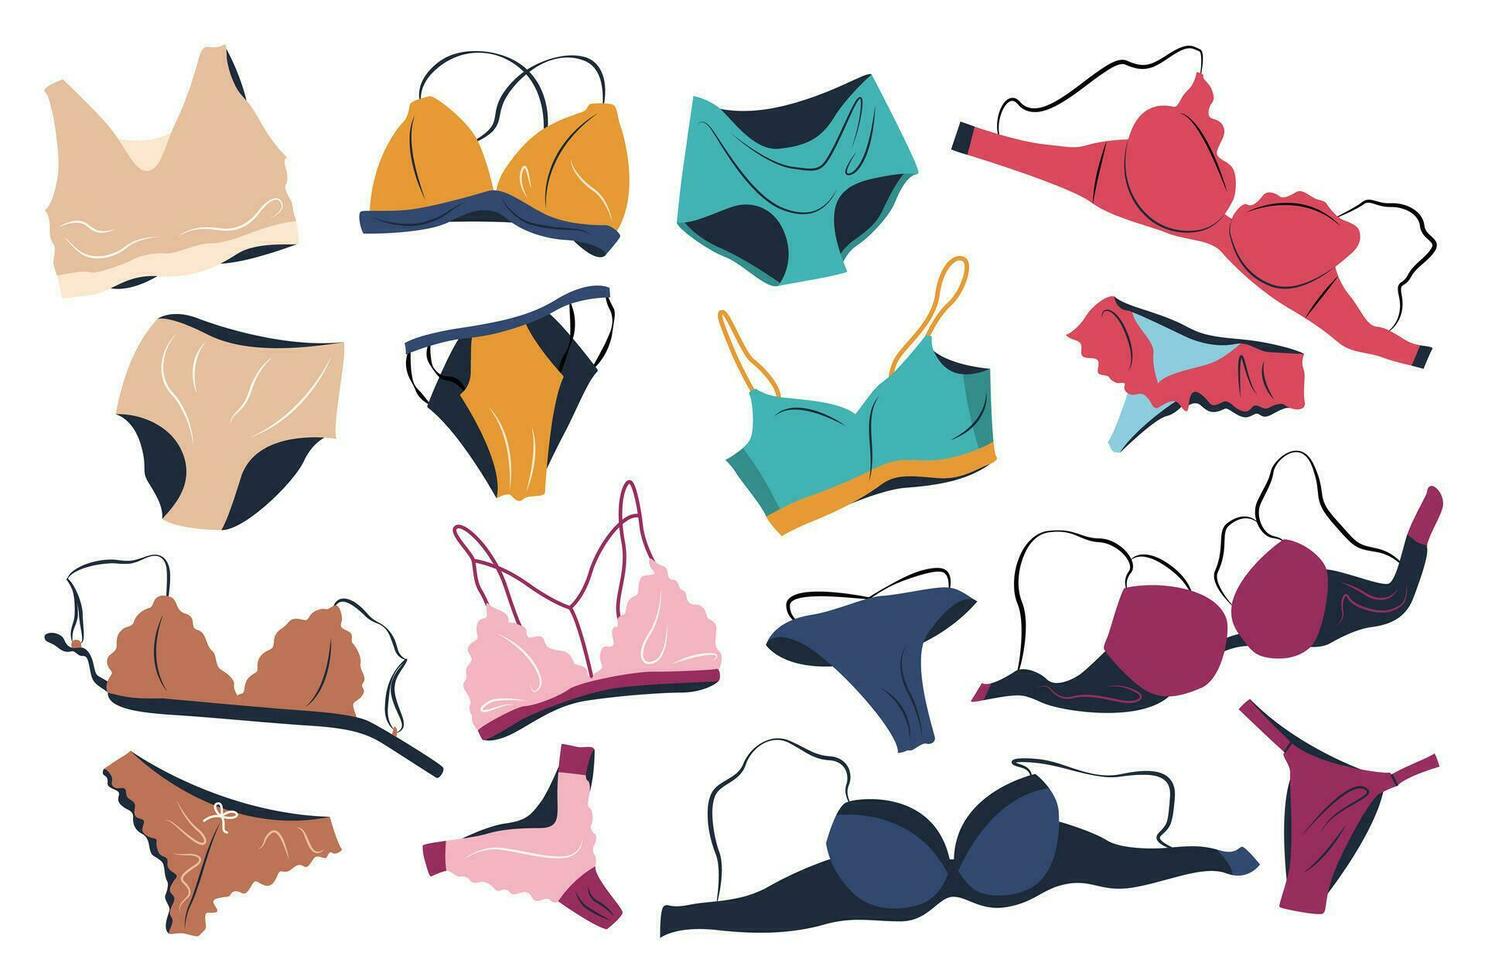 Types Of Women's Panties And Bras. Set Of Underwear. Vector Illustration  Royalty Free SVG, Cliparts, Vectors, and Stock Illustration. Image  139118422.